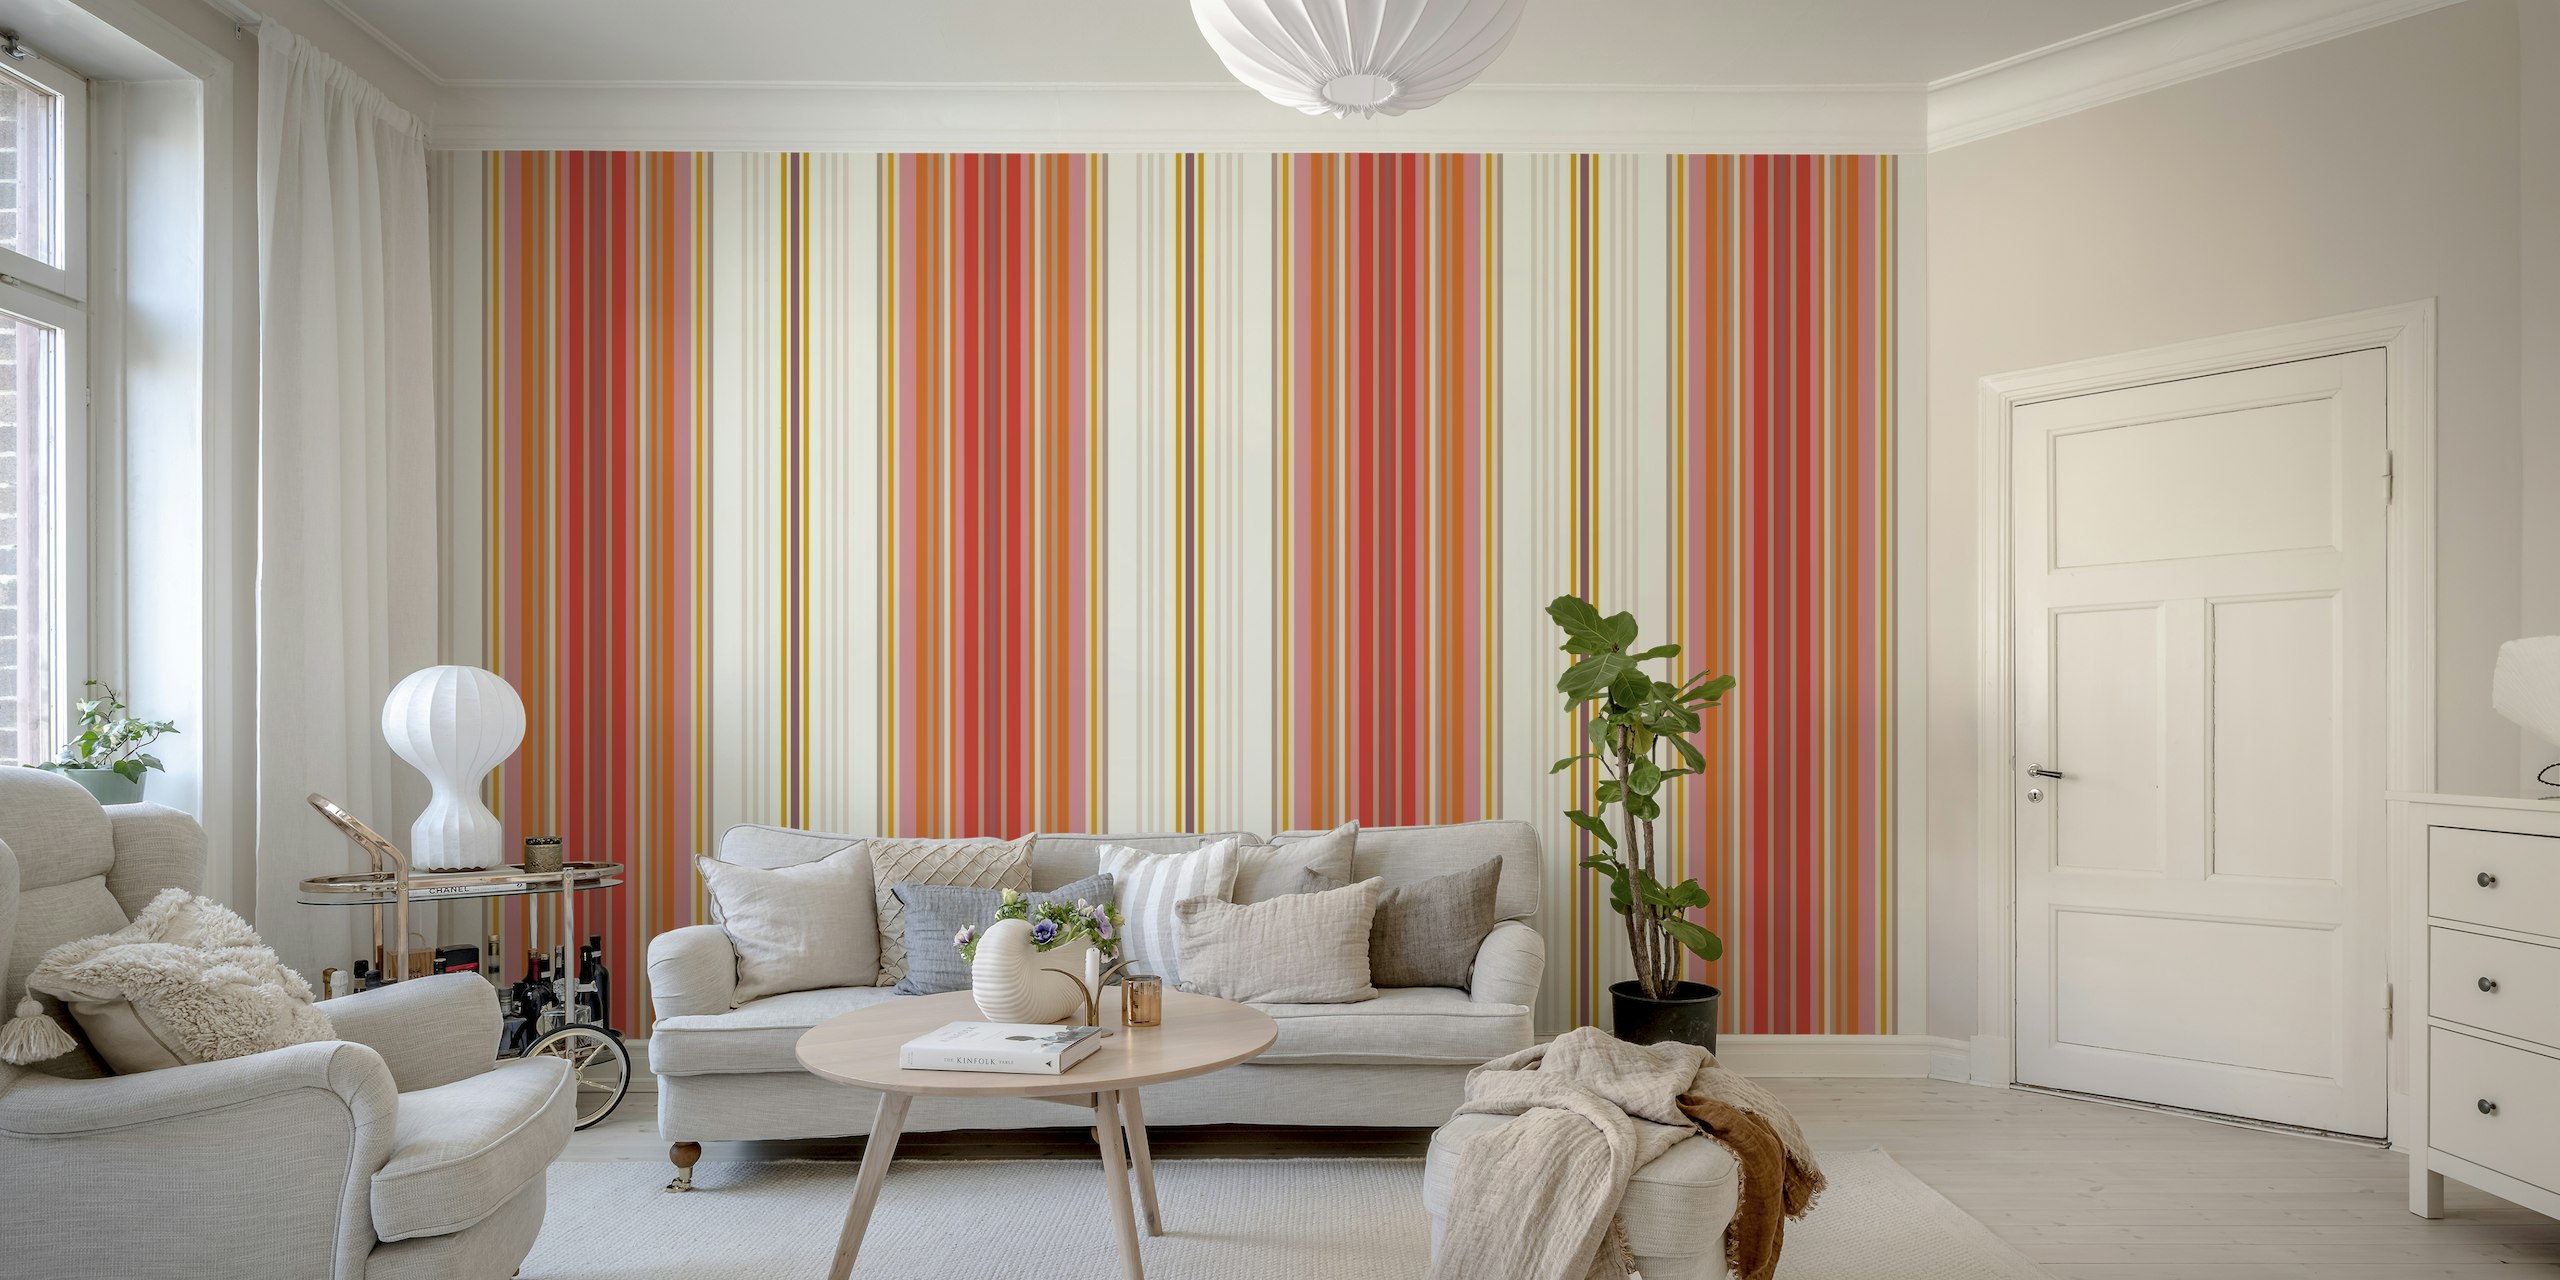 70s striped wallpaper - Red tapete